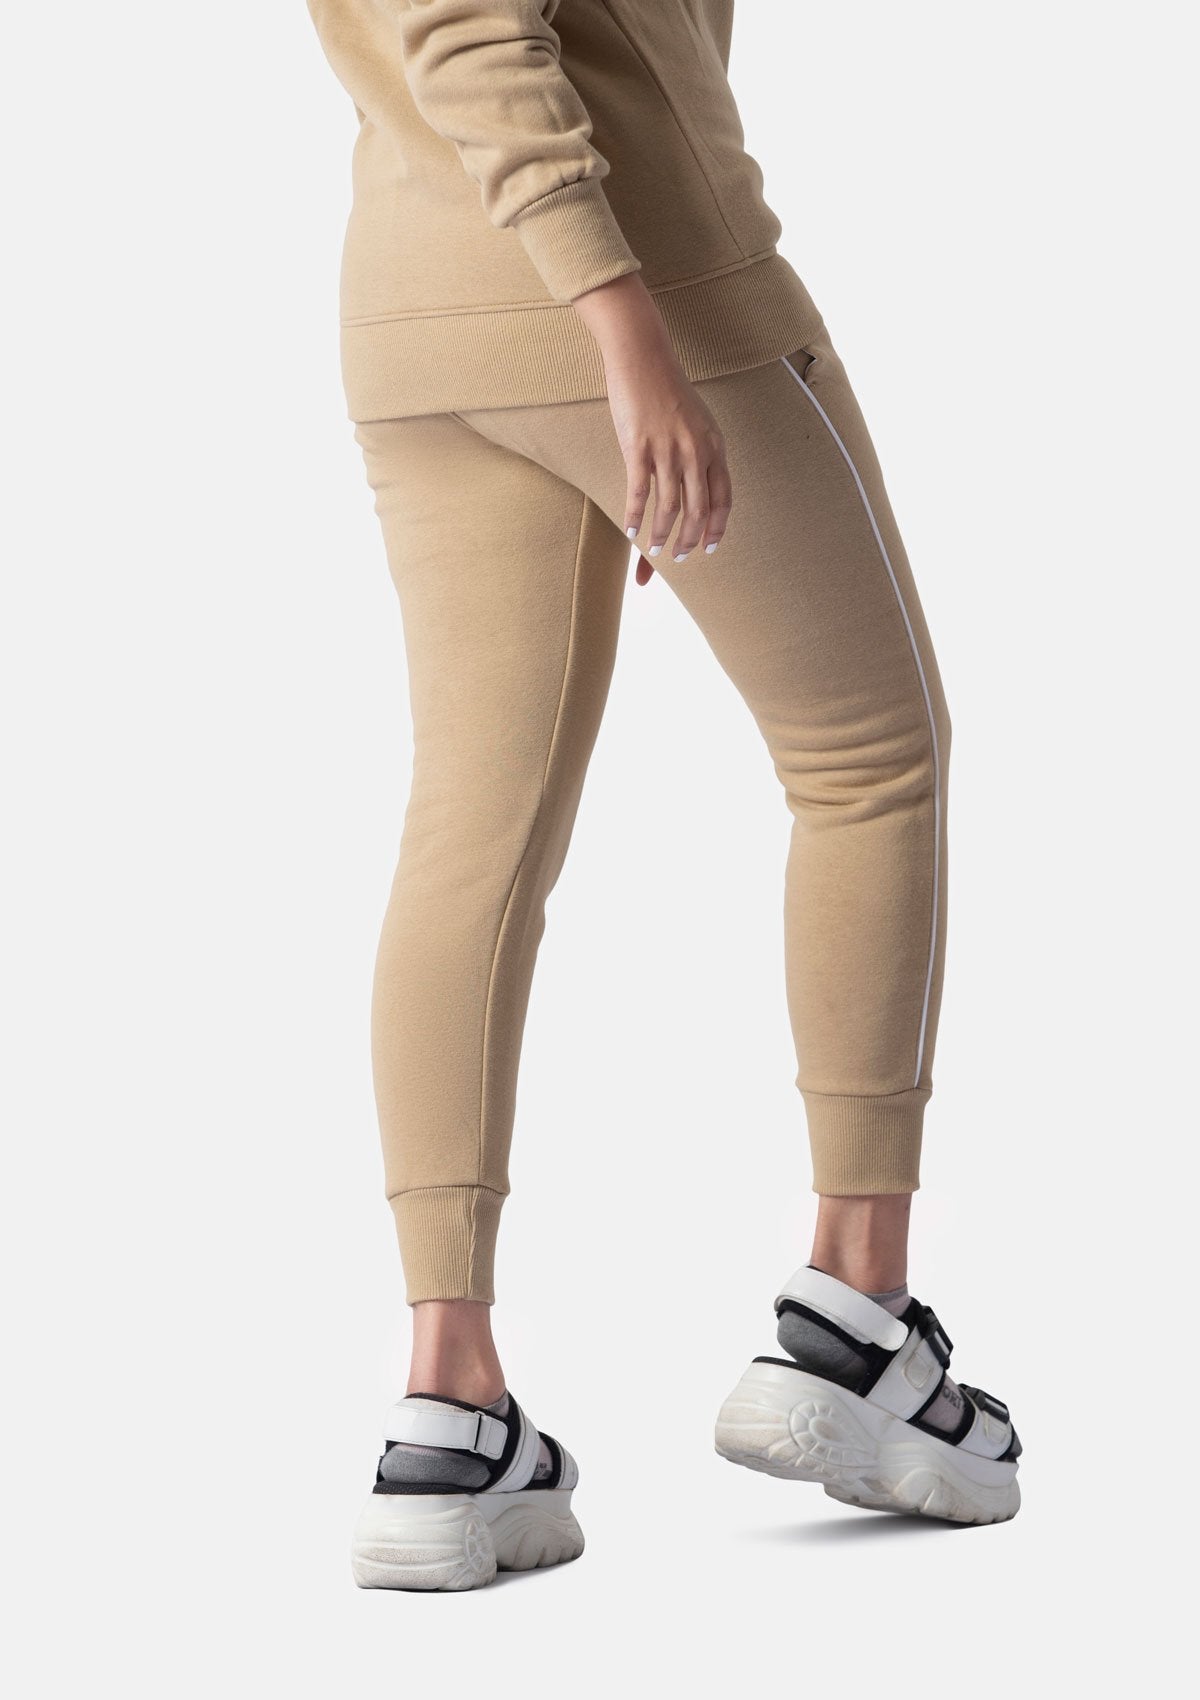 BEIGE WATER REPELLENT TROUSERS - Nomad Apparel